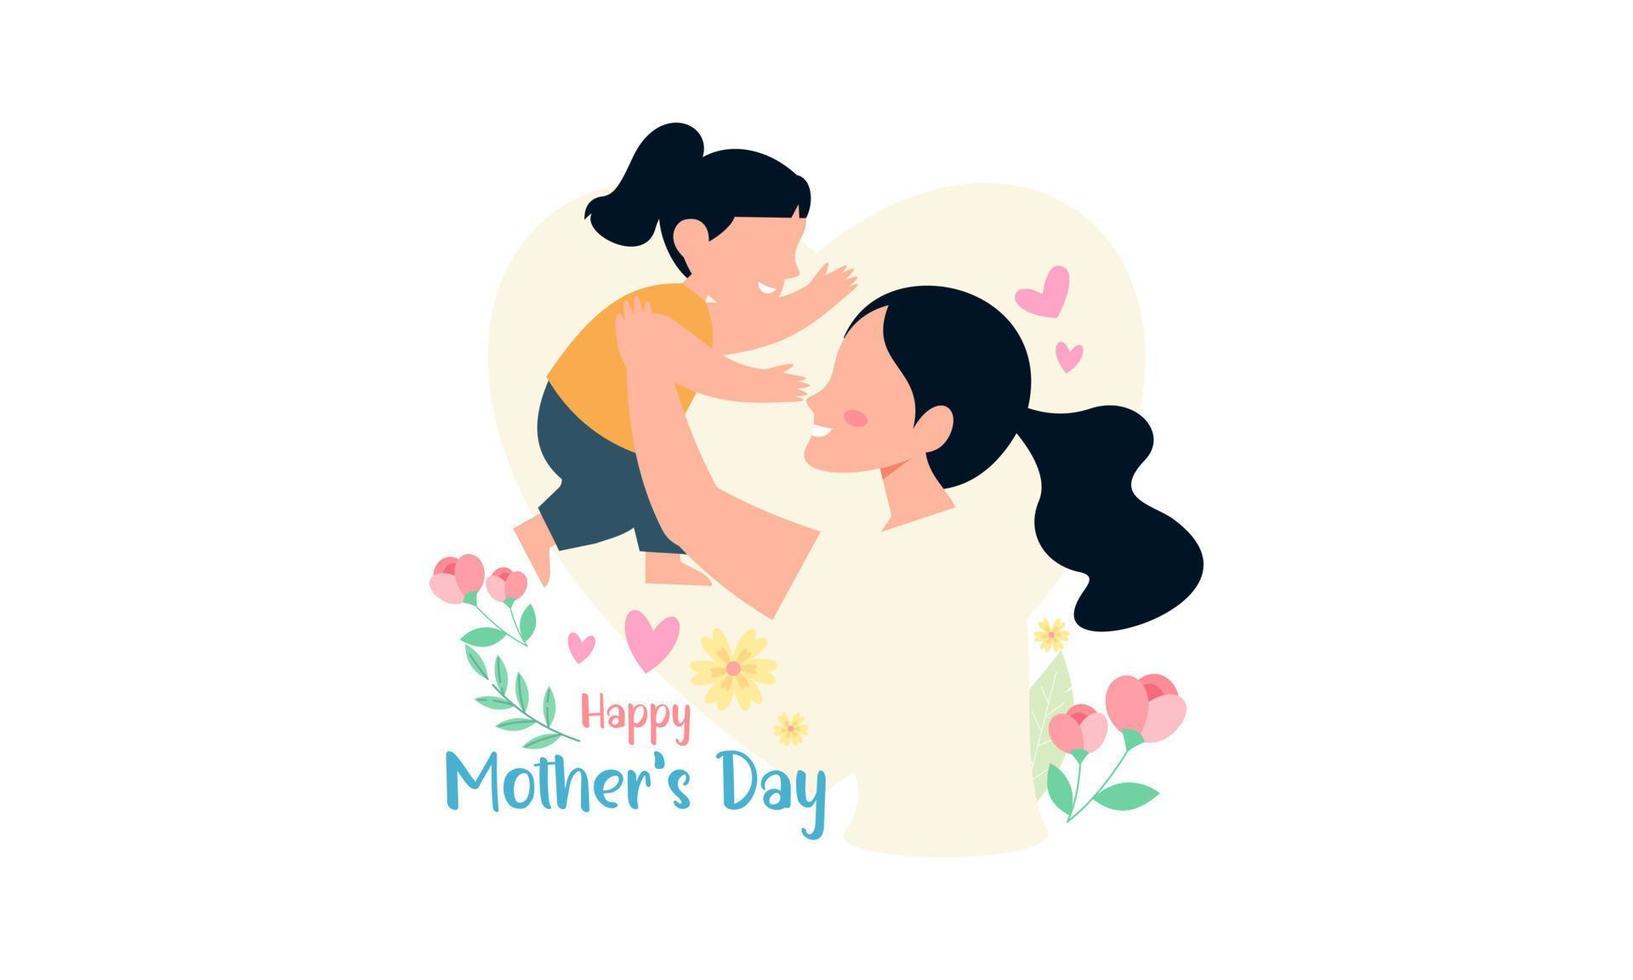 Happy Mother's Day. Happy Mother and Her Child Illustration vector